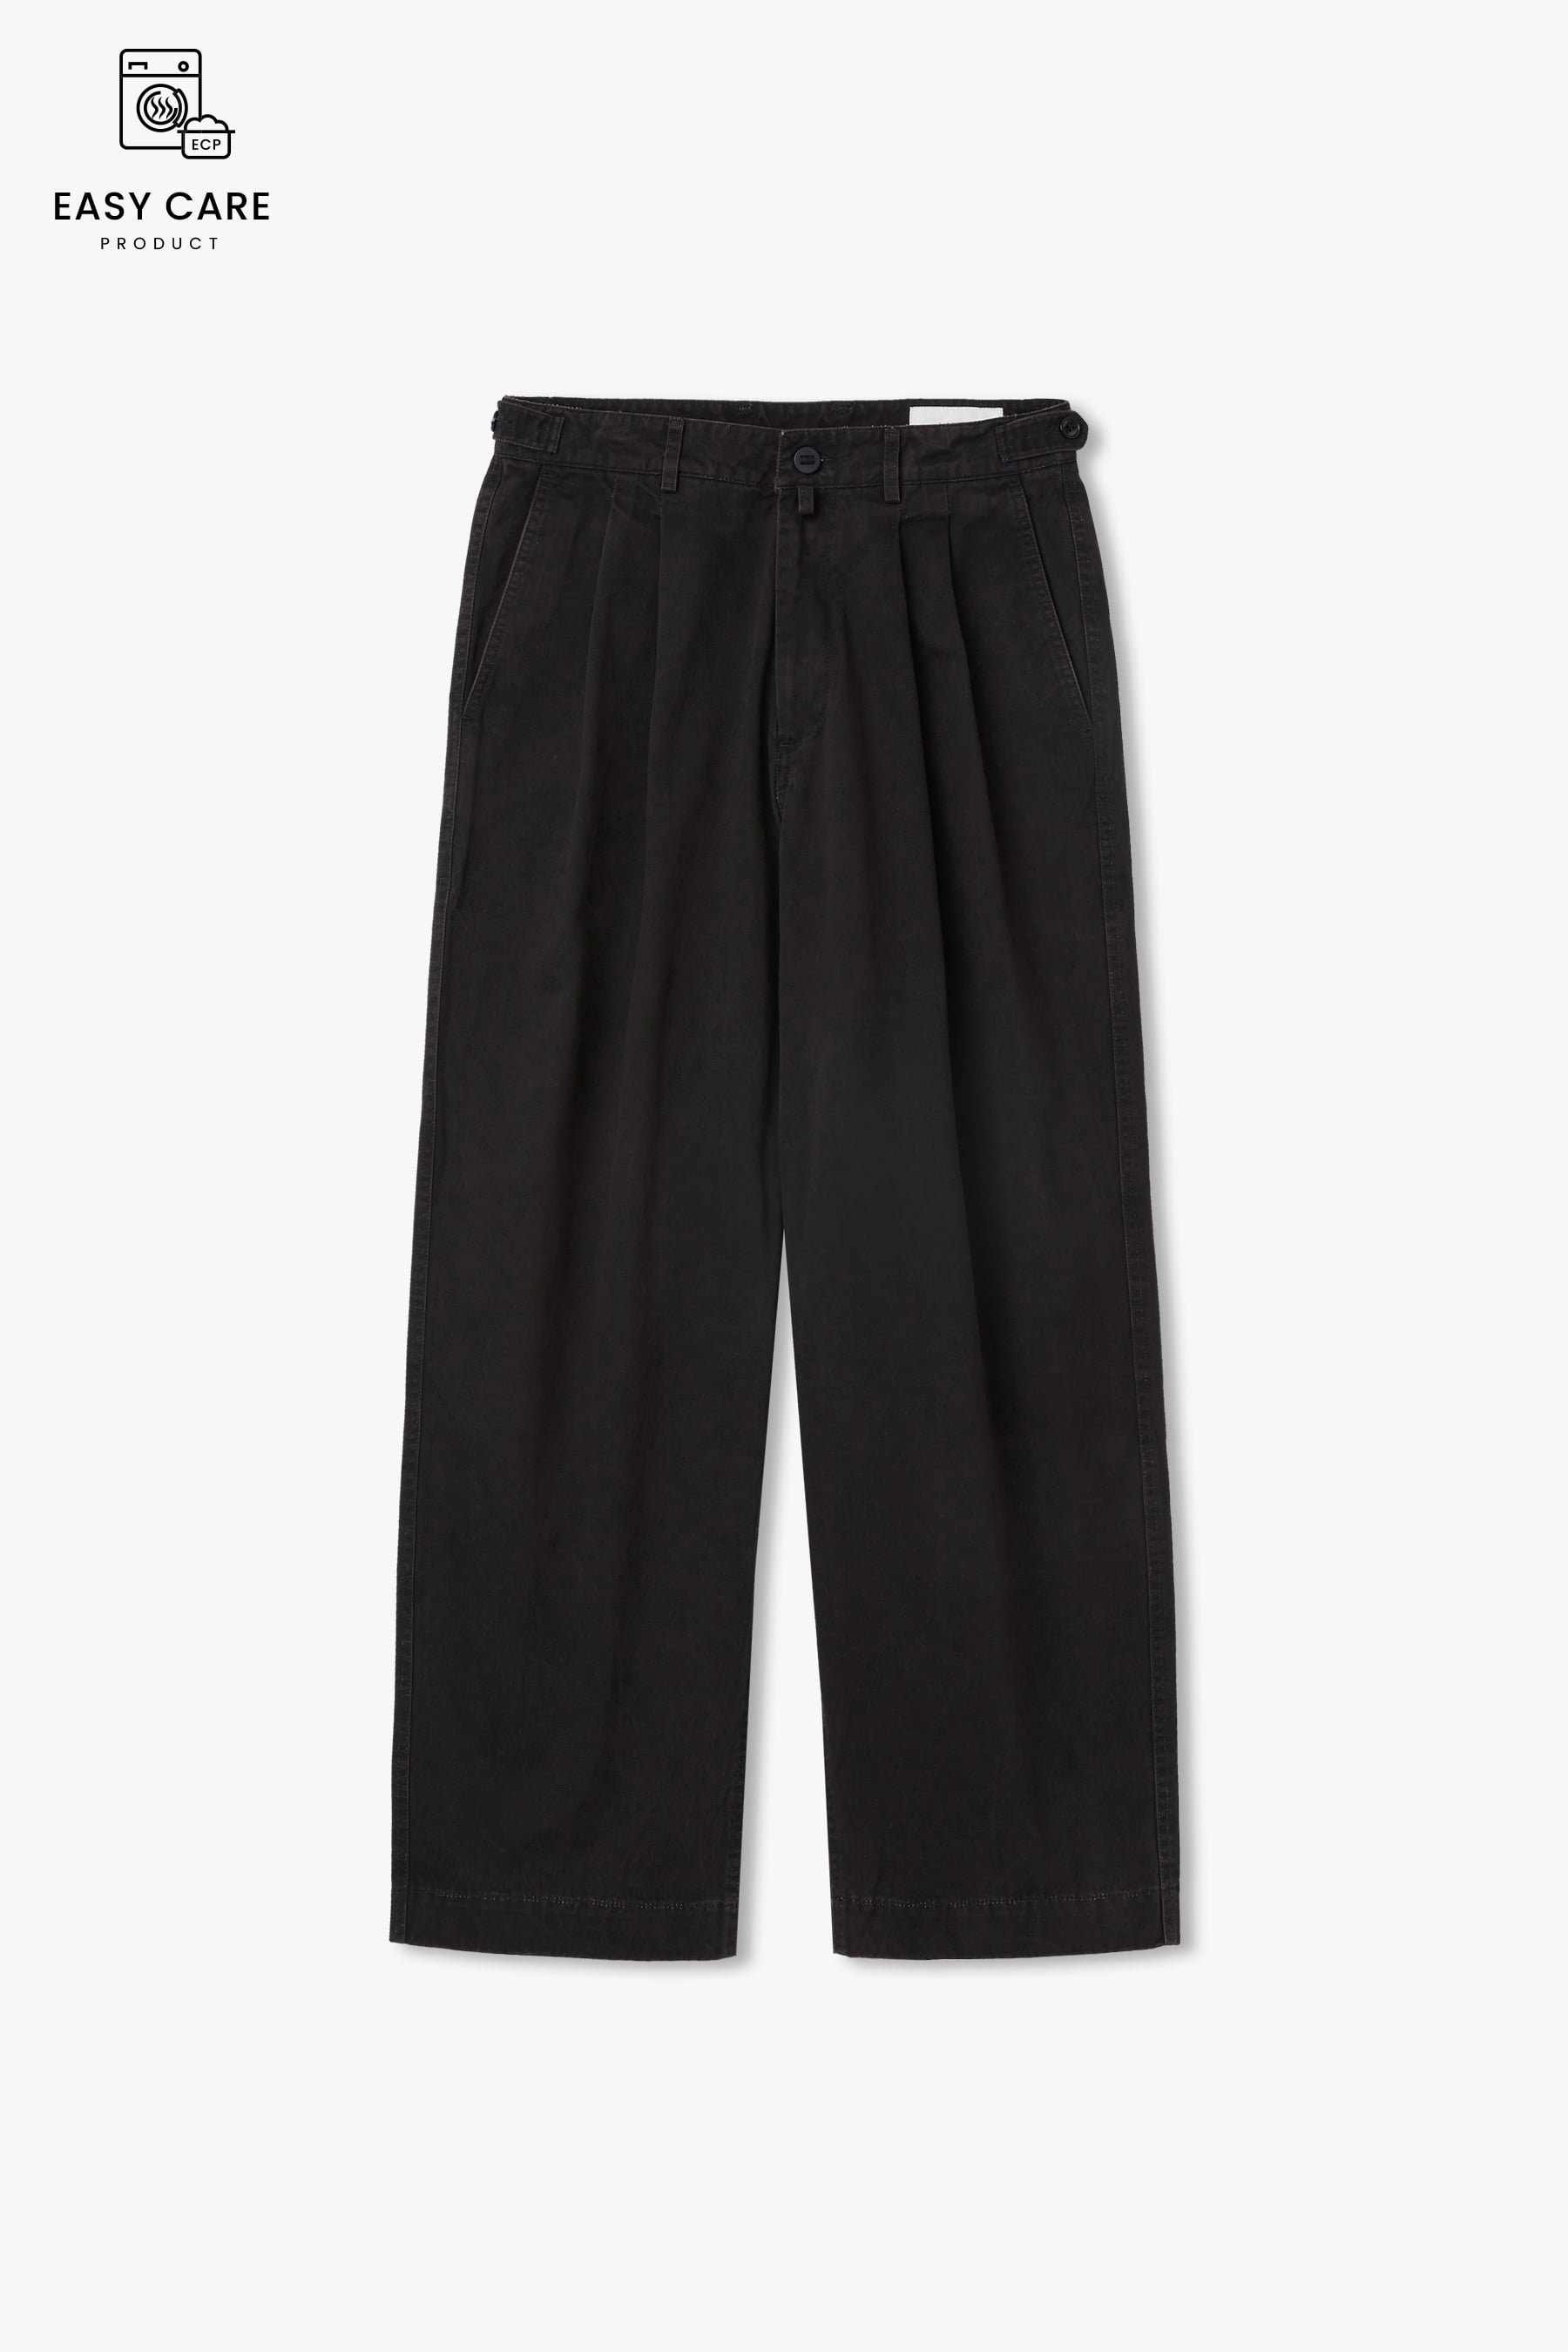 DUSTY BLACK SOFT FLUFF COTTON YRS Y-550 WASHED WIDE CHINO PANTS (ECP GARMENT PROCESS)